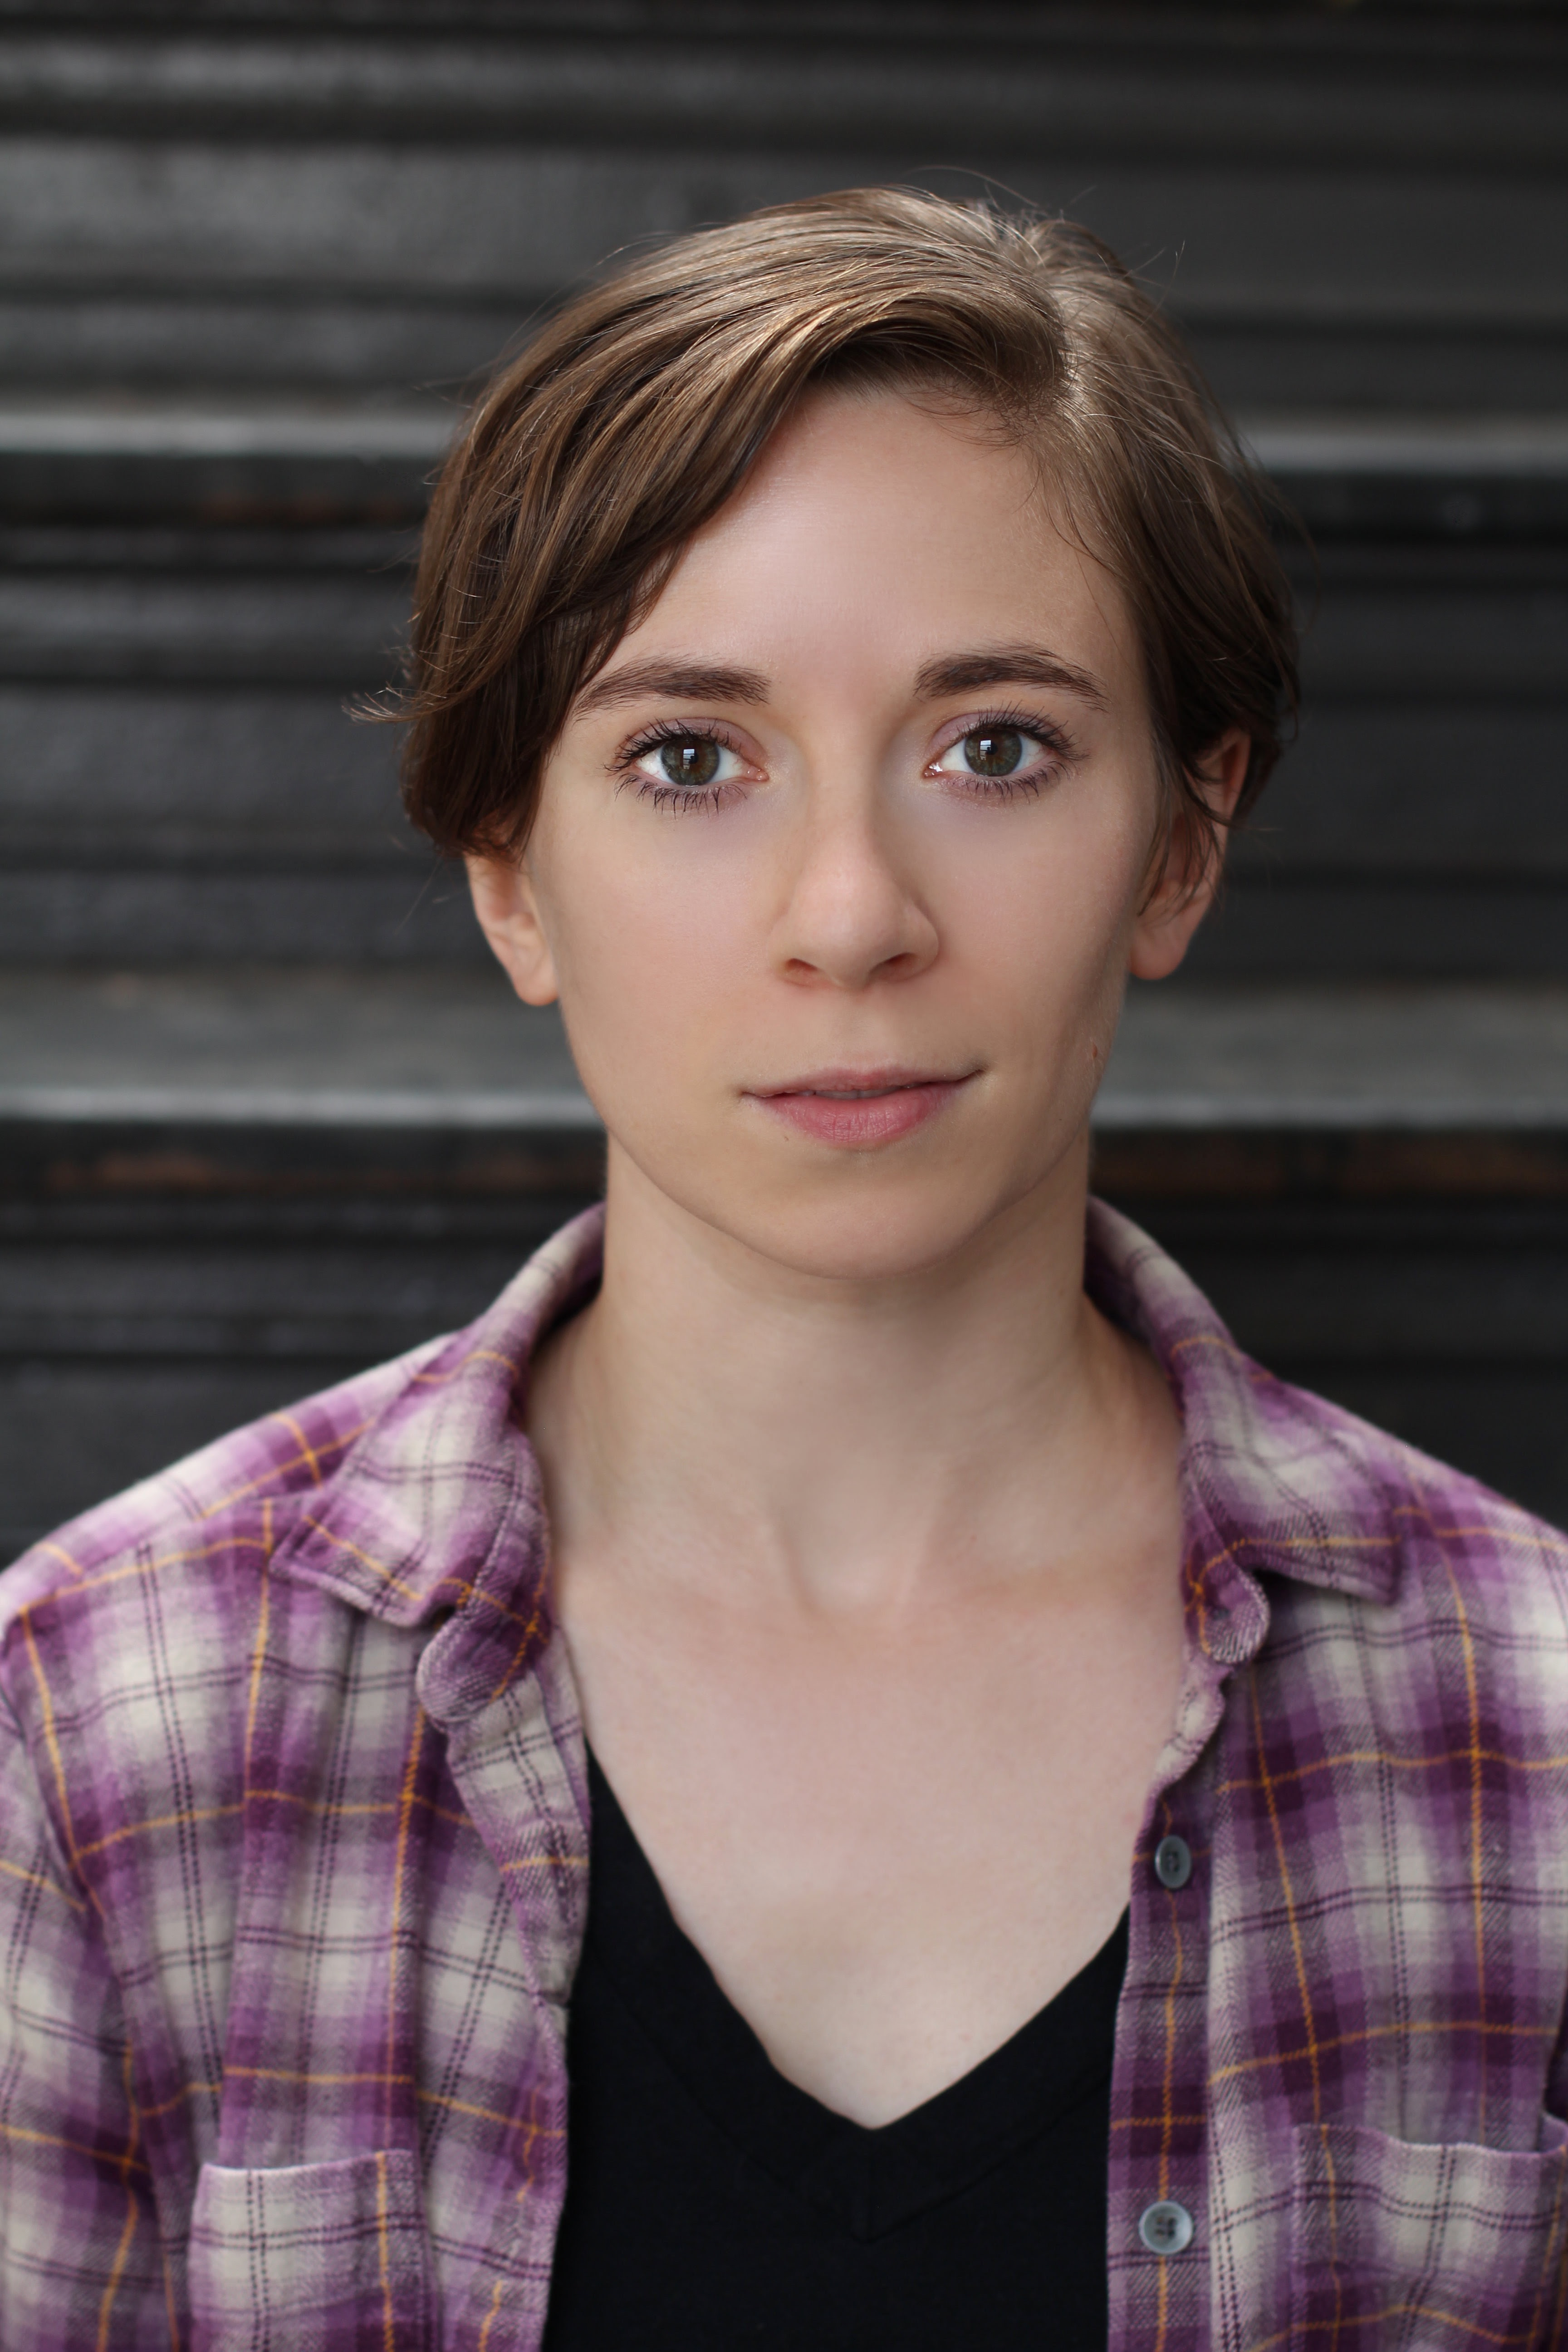 Danielle sits, looking into the camera. Her brown hair is short and parted deeply to one side. She is wearing a purple, white, and gold plaid overshirt, which is unbuttoned and shows her black v-neck tee. Her face shows the hint of a smile.